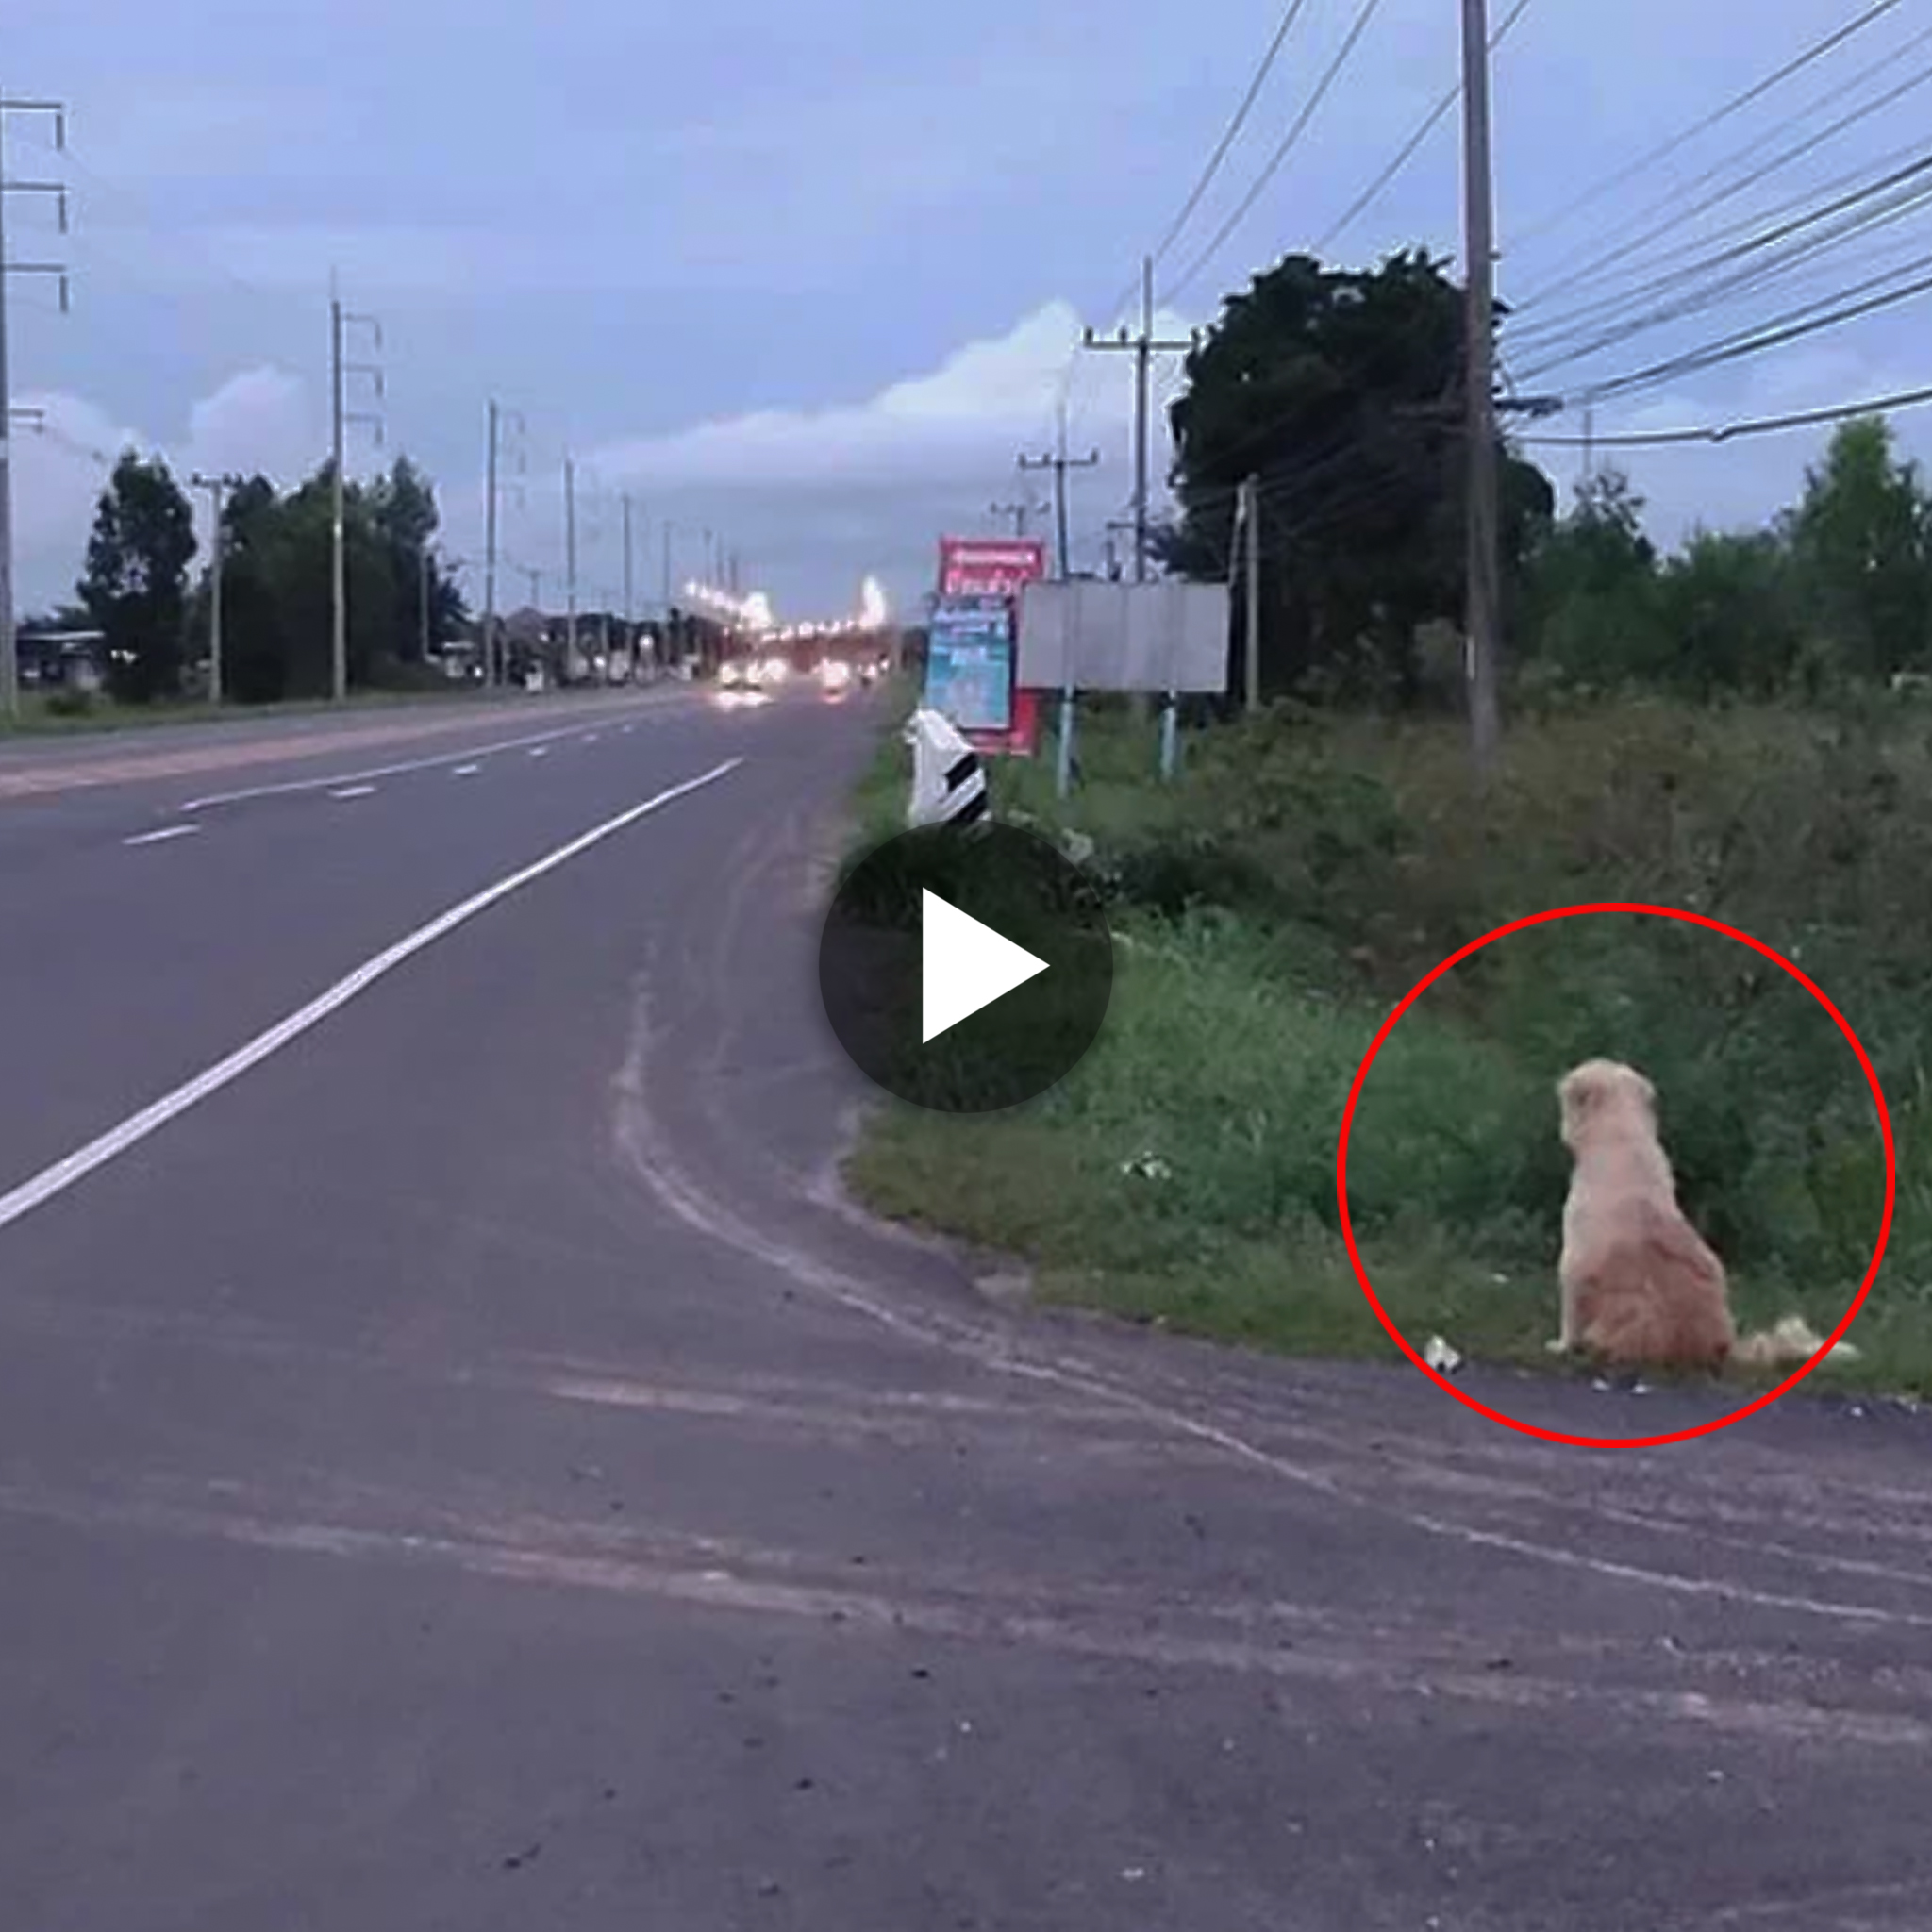 For four long years, a devoted dog stood watch in the same spot, showing kindness and patience until the day it eventually reunited its owners, who had lost their beloved pet.